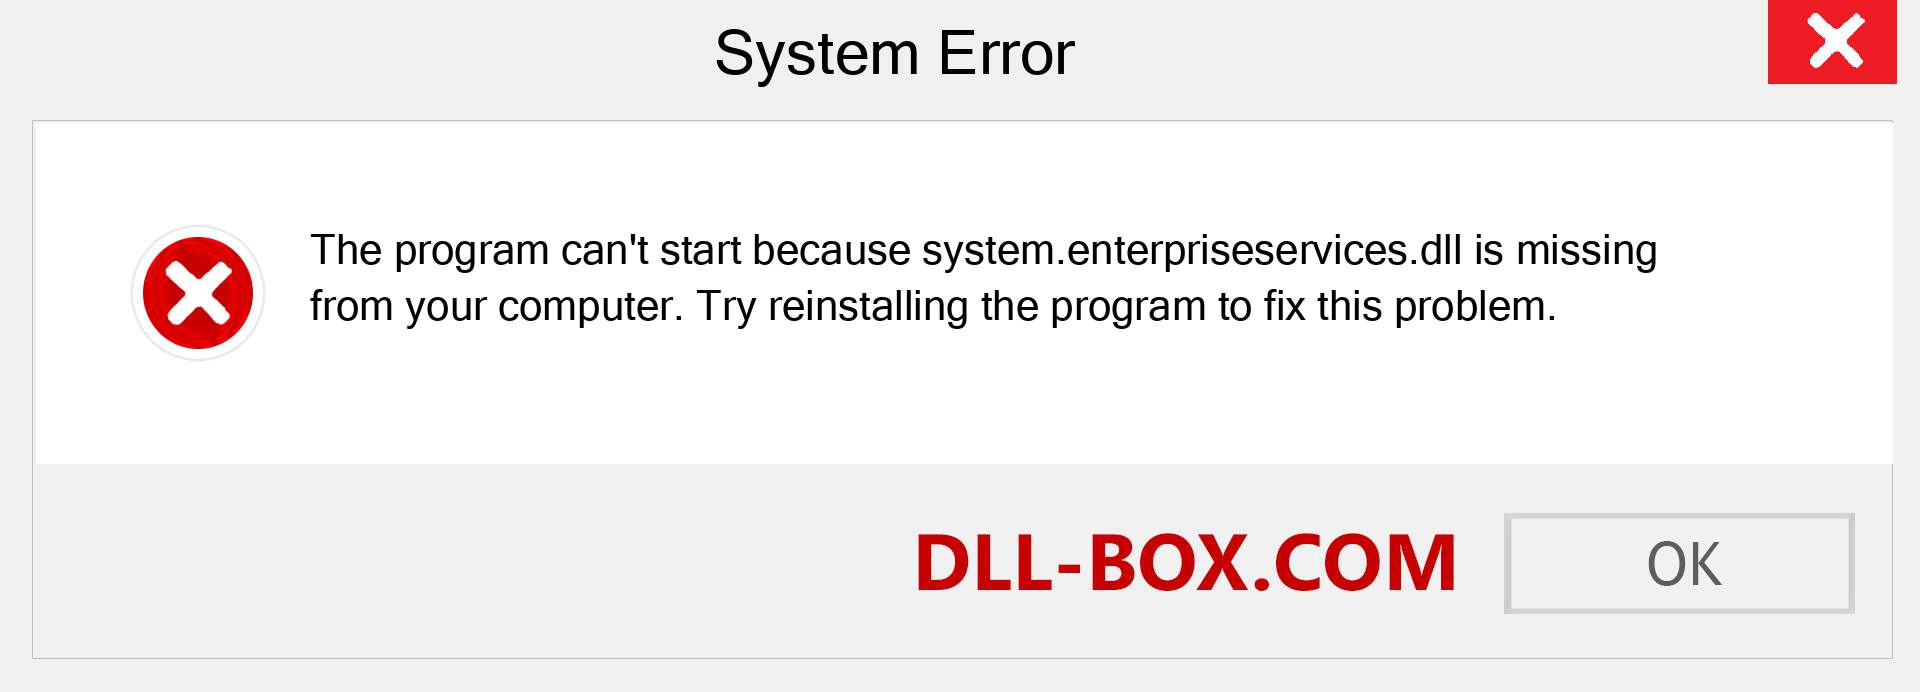  system.enterpriseservices.dll file is missing?. Download for Windows 7, 8, 10 - Fix  system.enterpriseservices dll Missing Error on Windows, photos, images